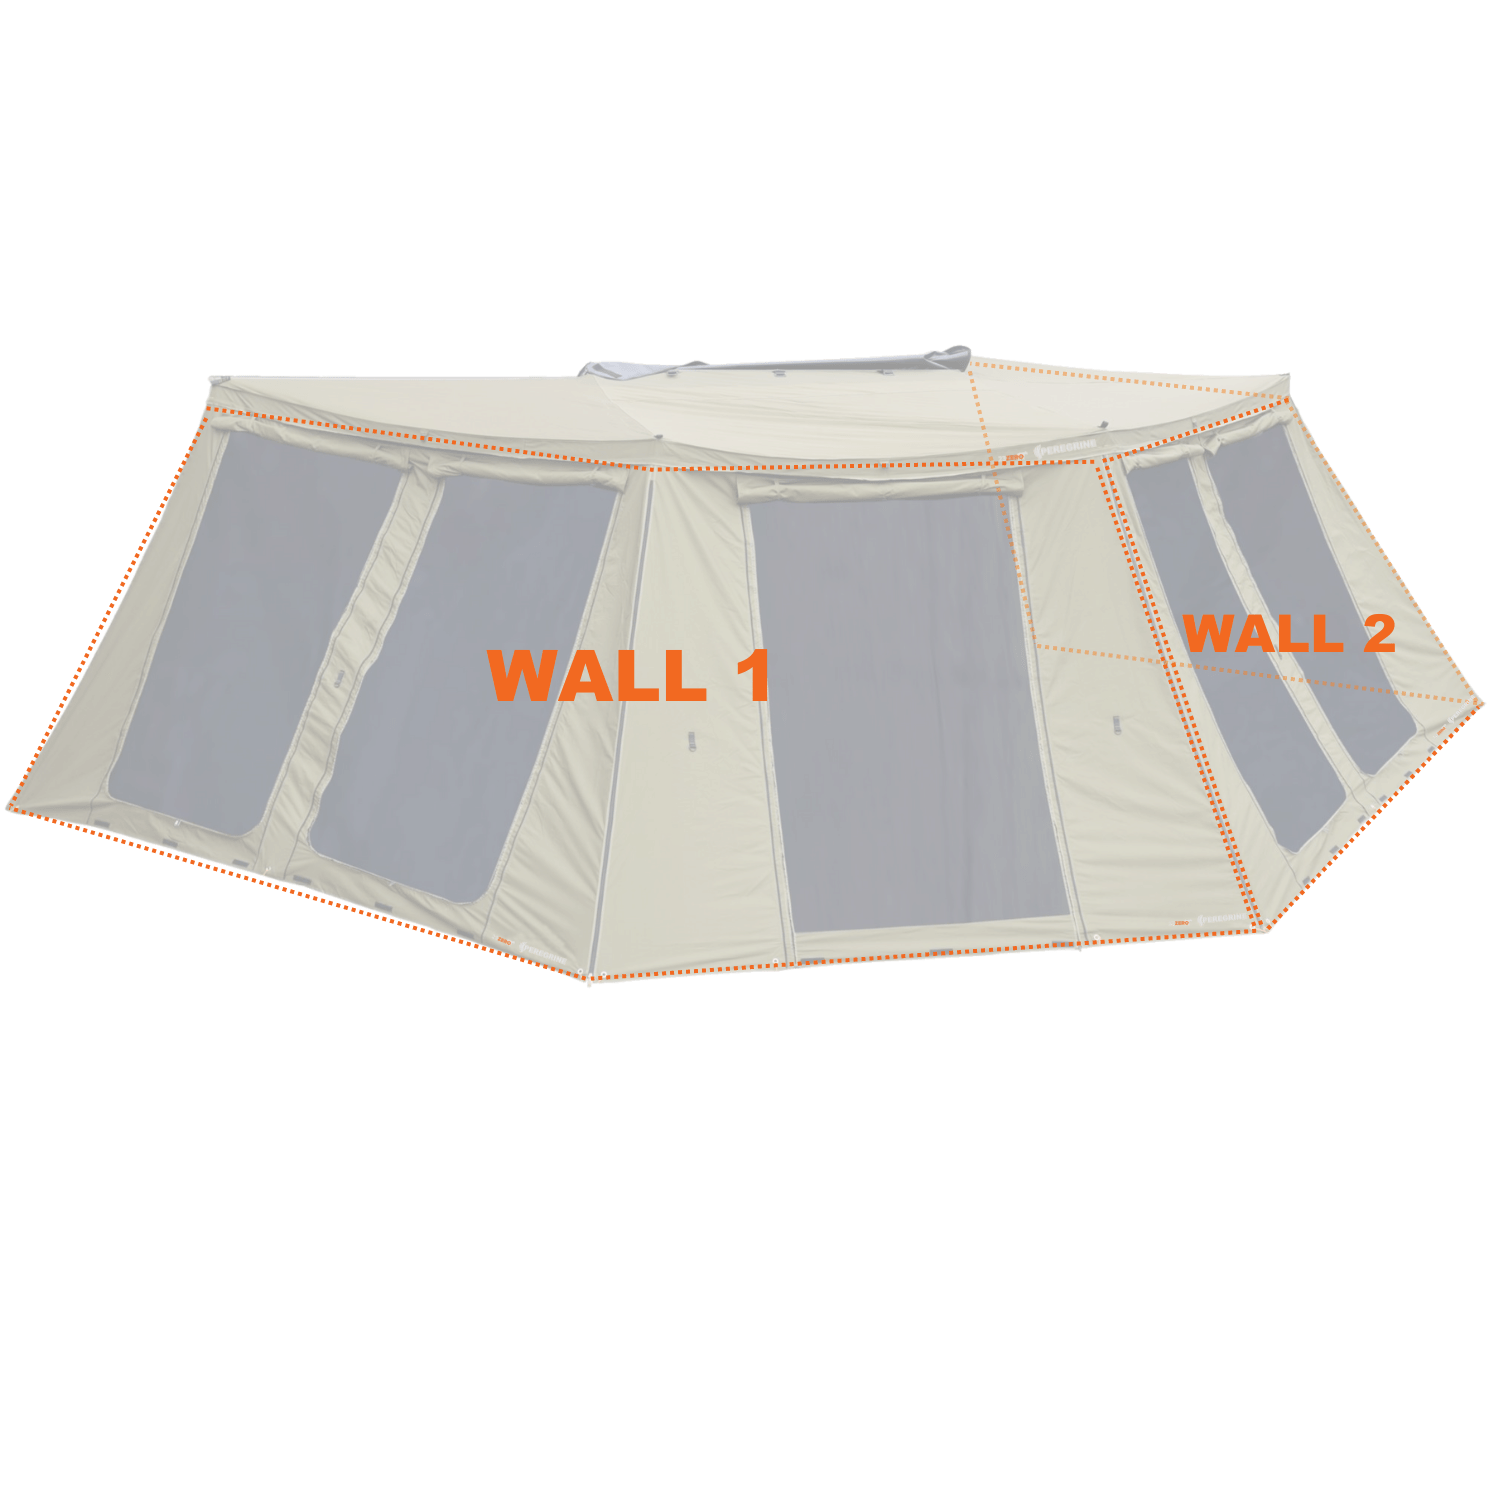 23ZERO 270 Awning Driver Side / None / Screen Wall Peregrine 2.0 | 270 Degree Awning | 23ZERO